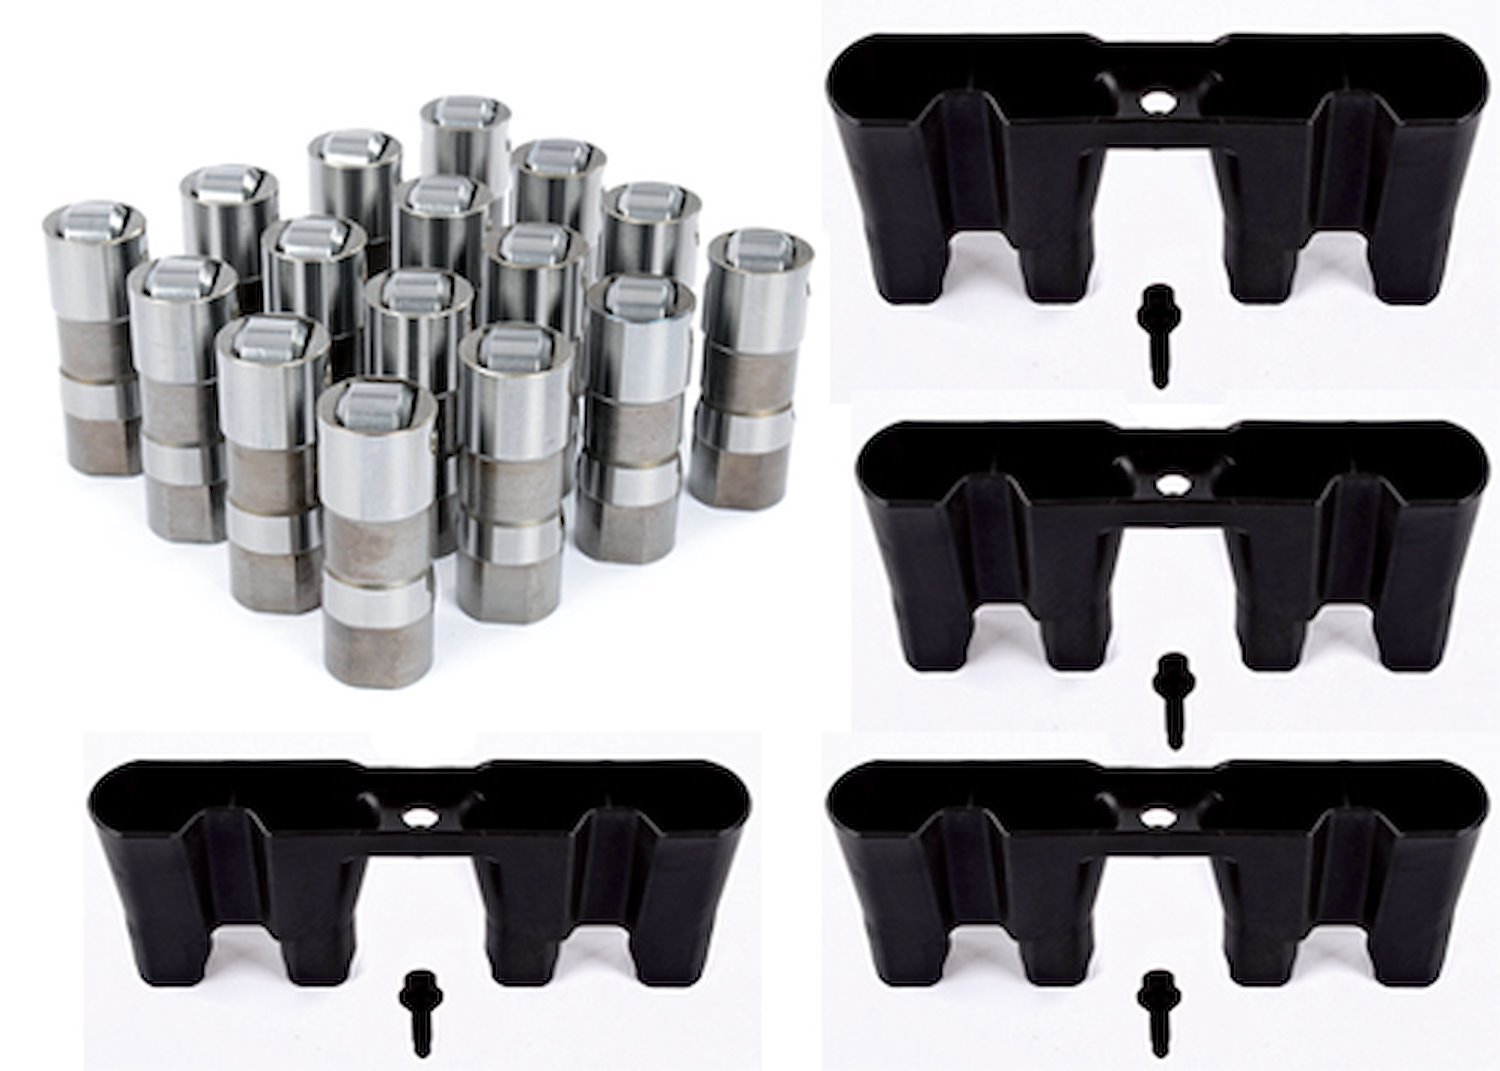 GM LS Series Hydraulic Roller Lifters and Lifter Guides for Gen III and IV LS Series GM Engines